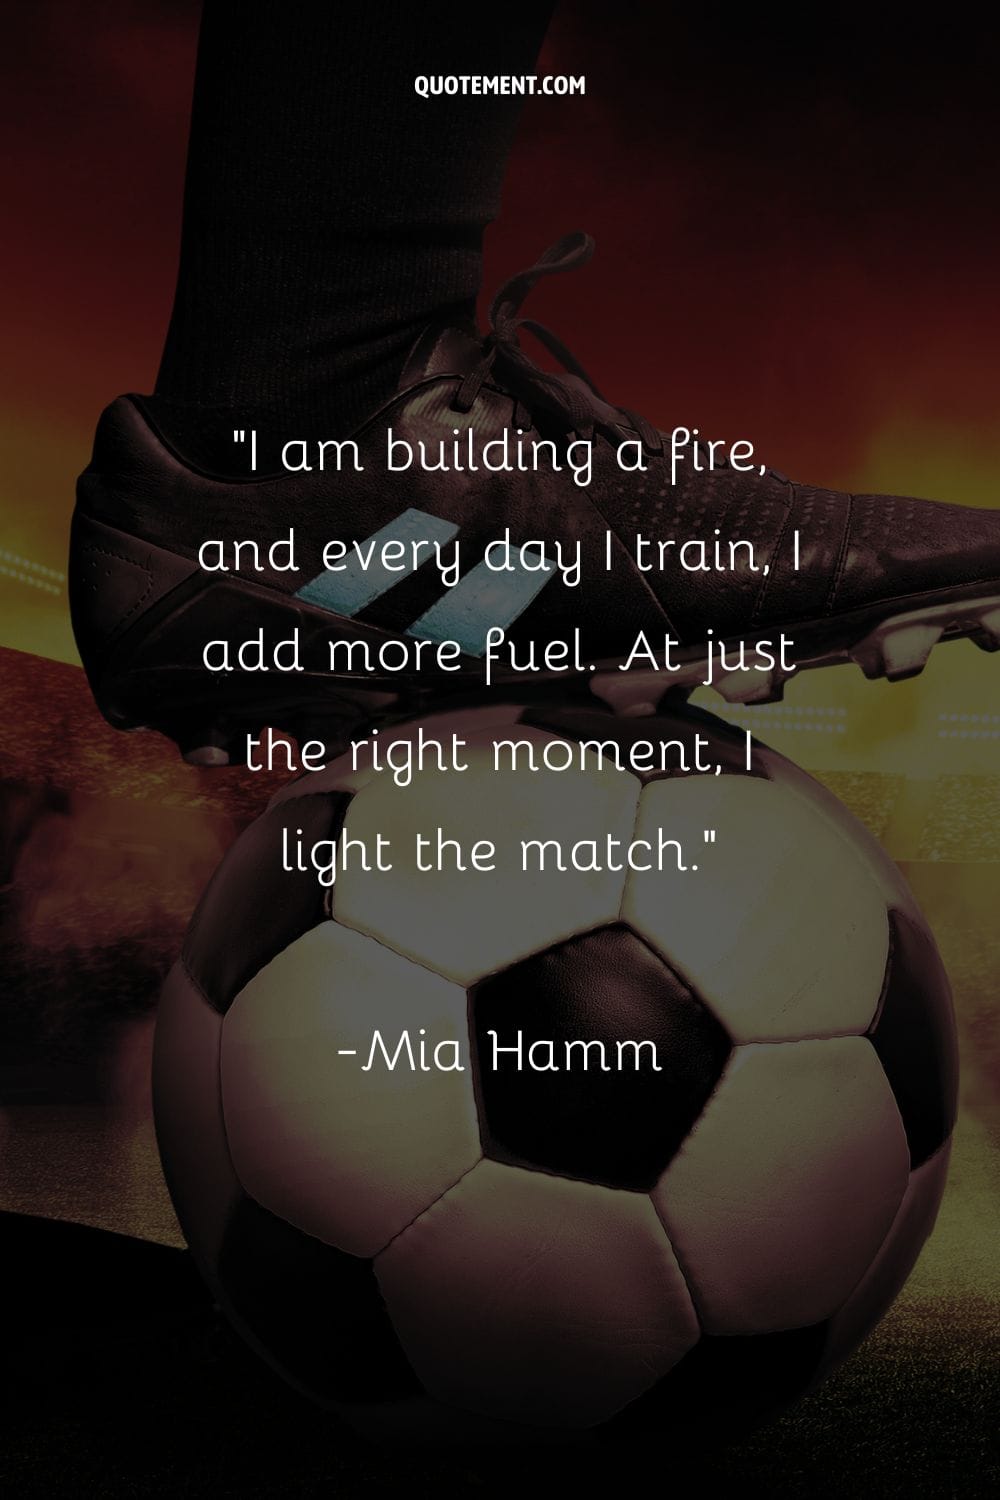 motivational soccer quote represented by a kick-off moment